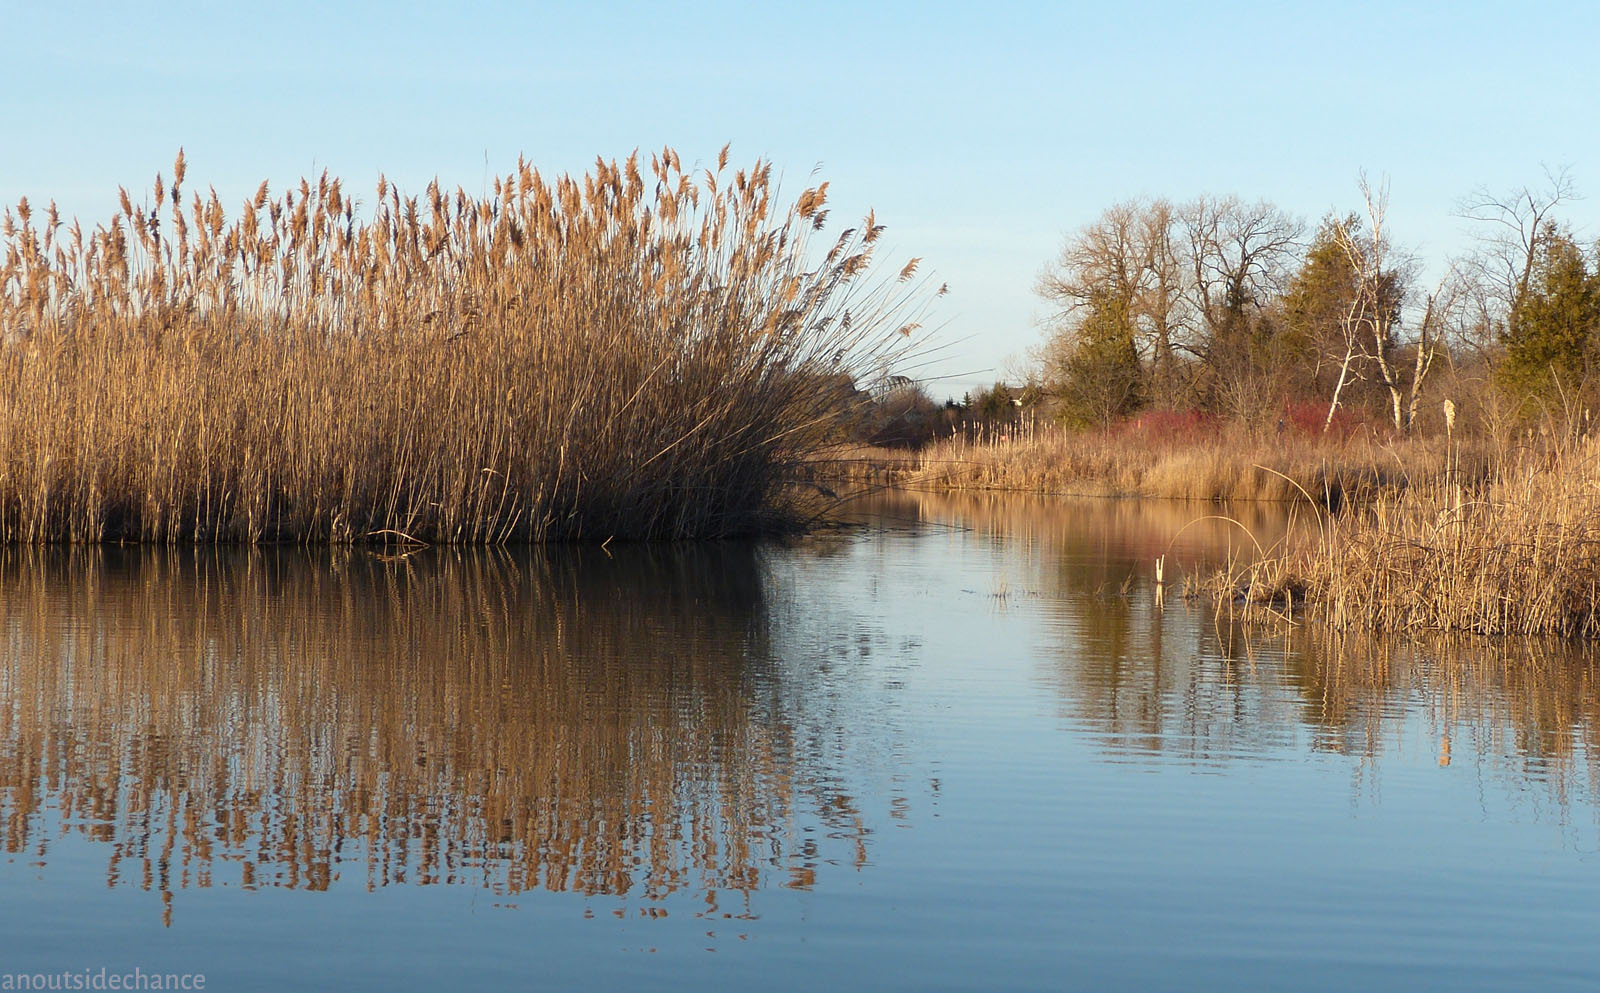 Top photo: a stand of phragmites in Westside Marsh, photographed in April 2...